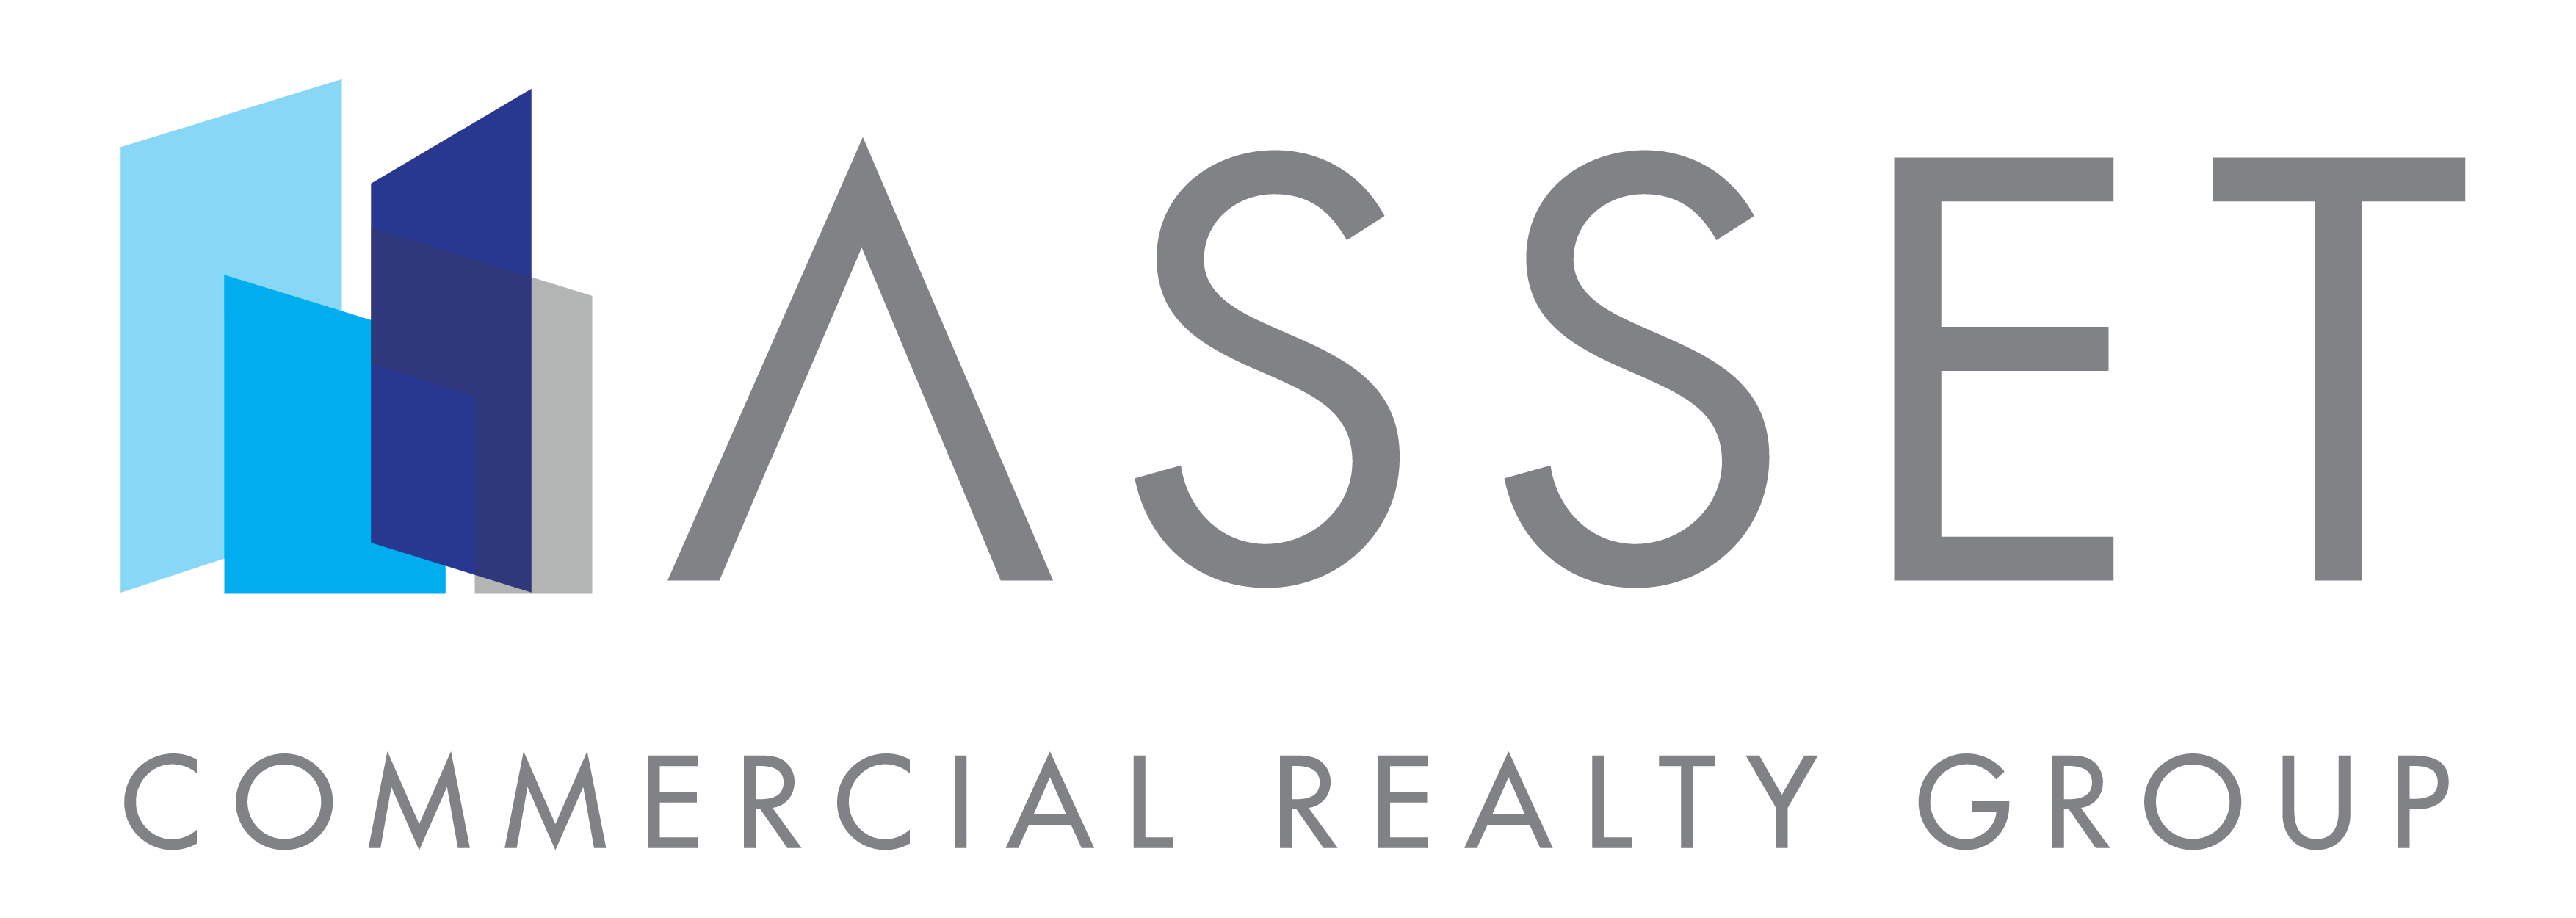 Commercial Real Estate Logo - Meet The Team – Asset Commercial Realty Group